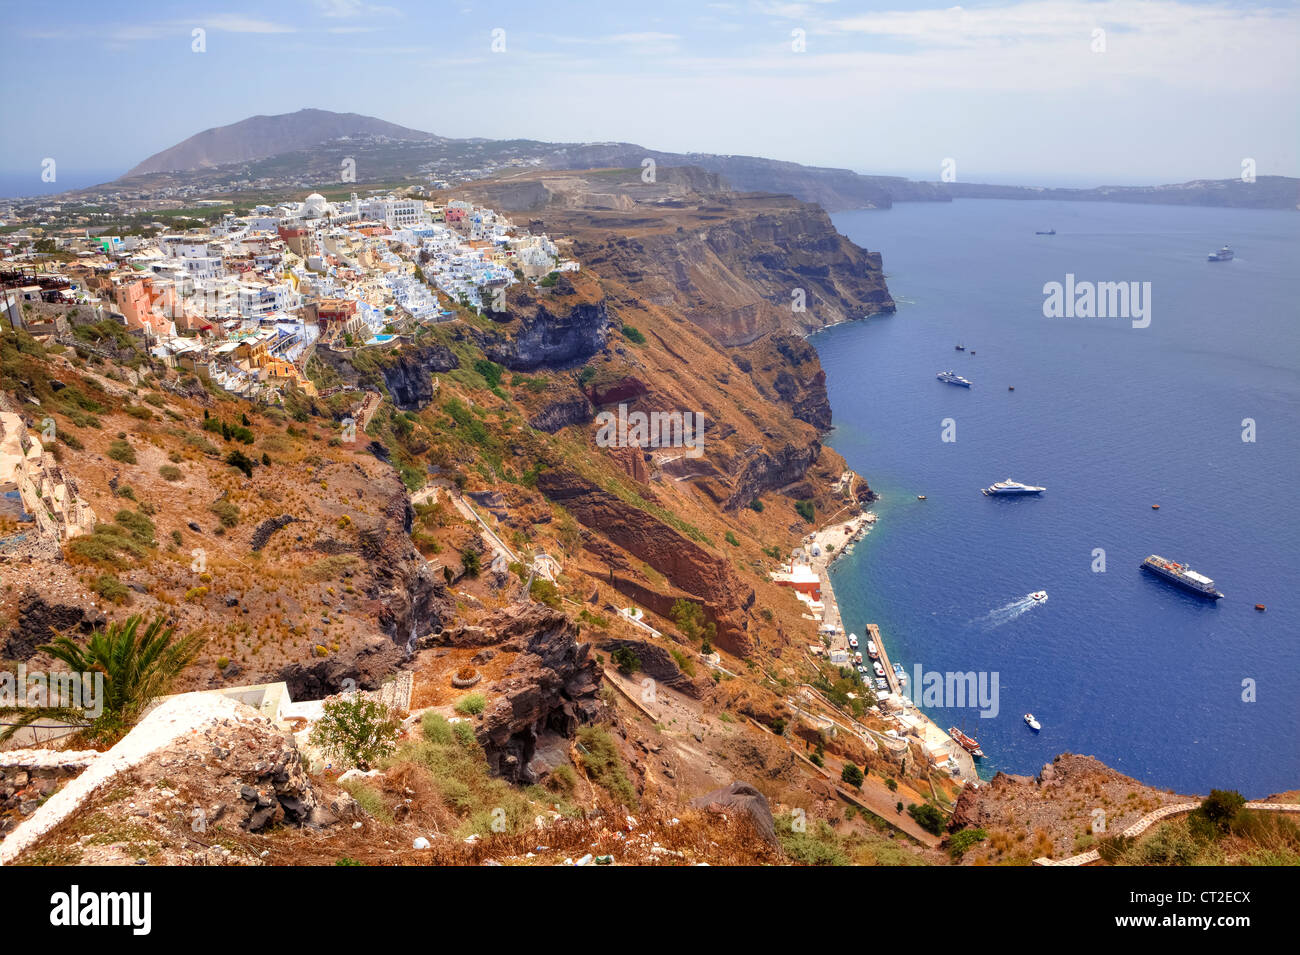 View of Fira and the old harbor, Santorini, Greece Stock Photo